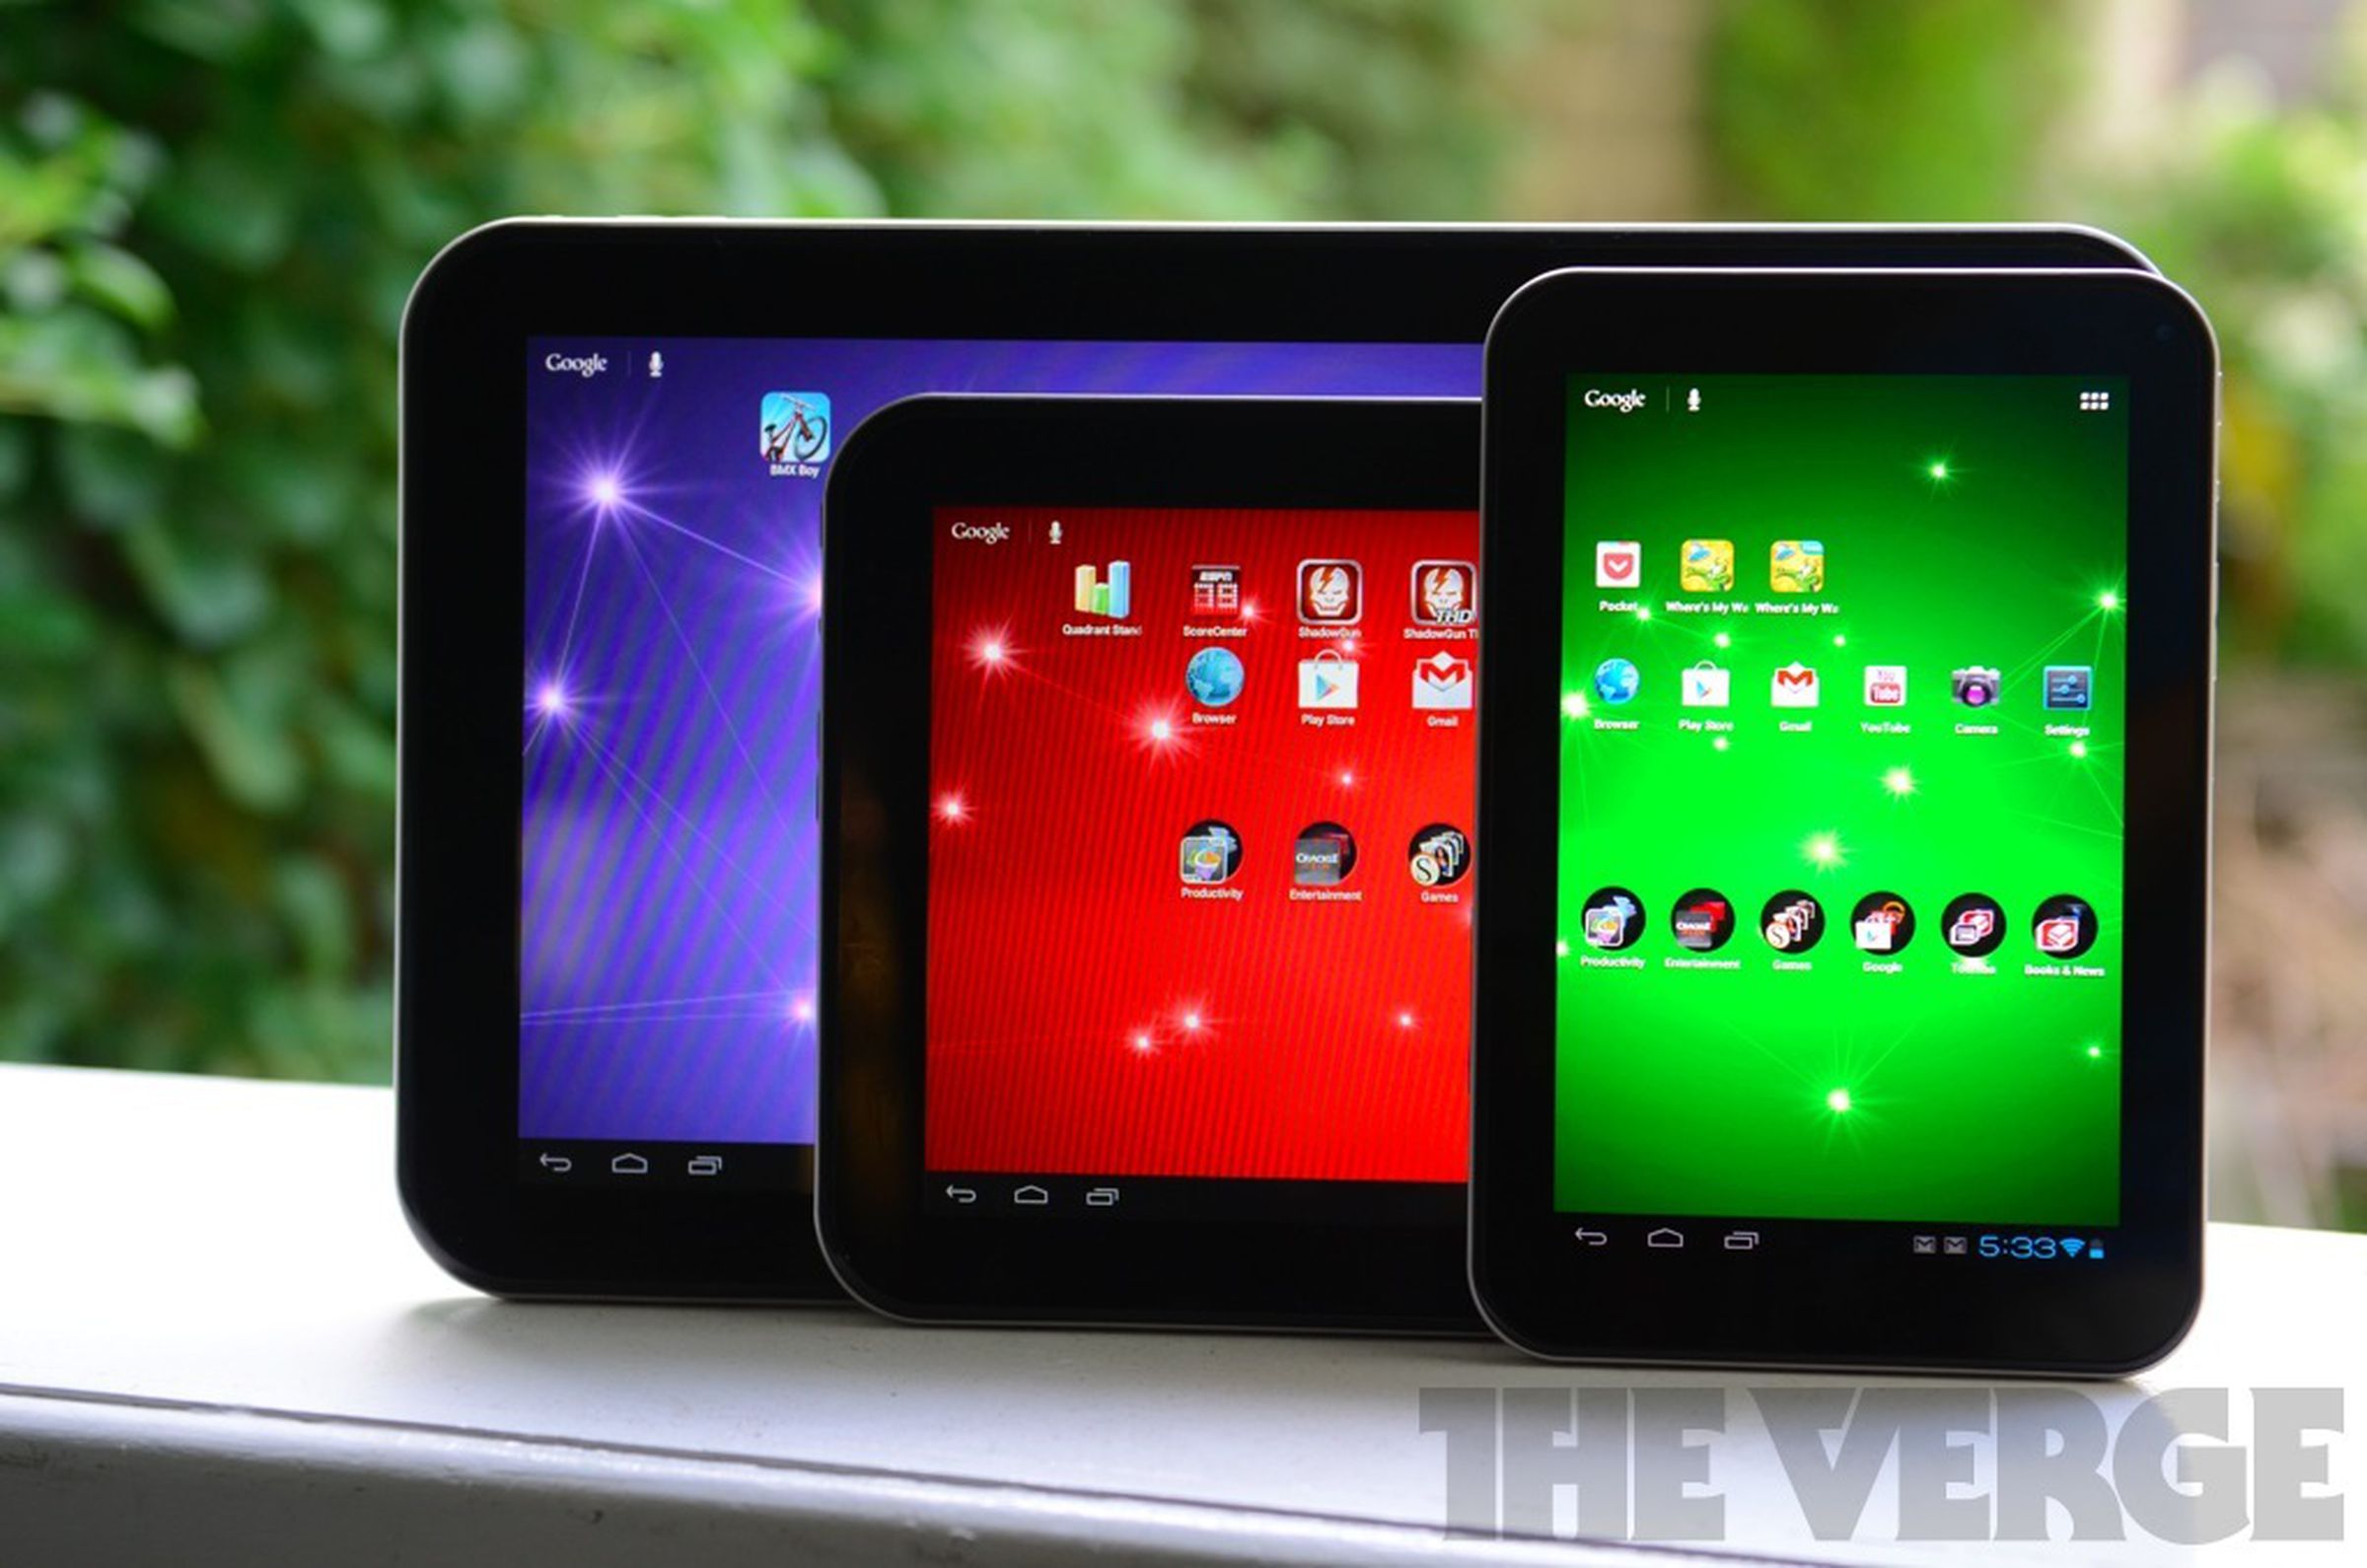 Toshiba Excite 13, Excite 10, Excite 7.7 review pictures